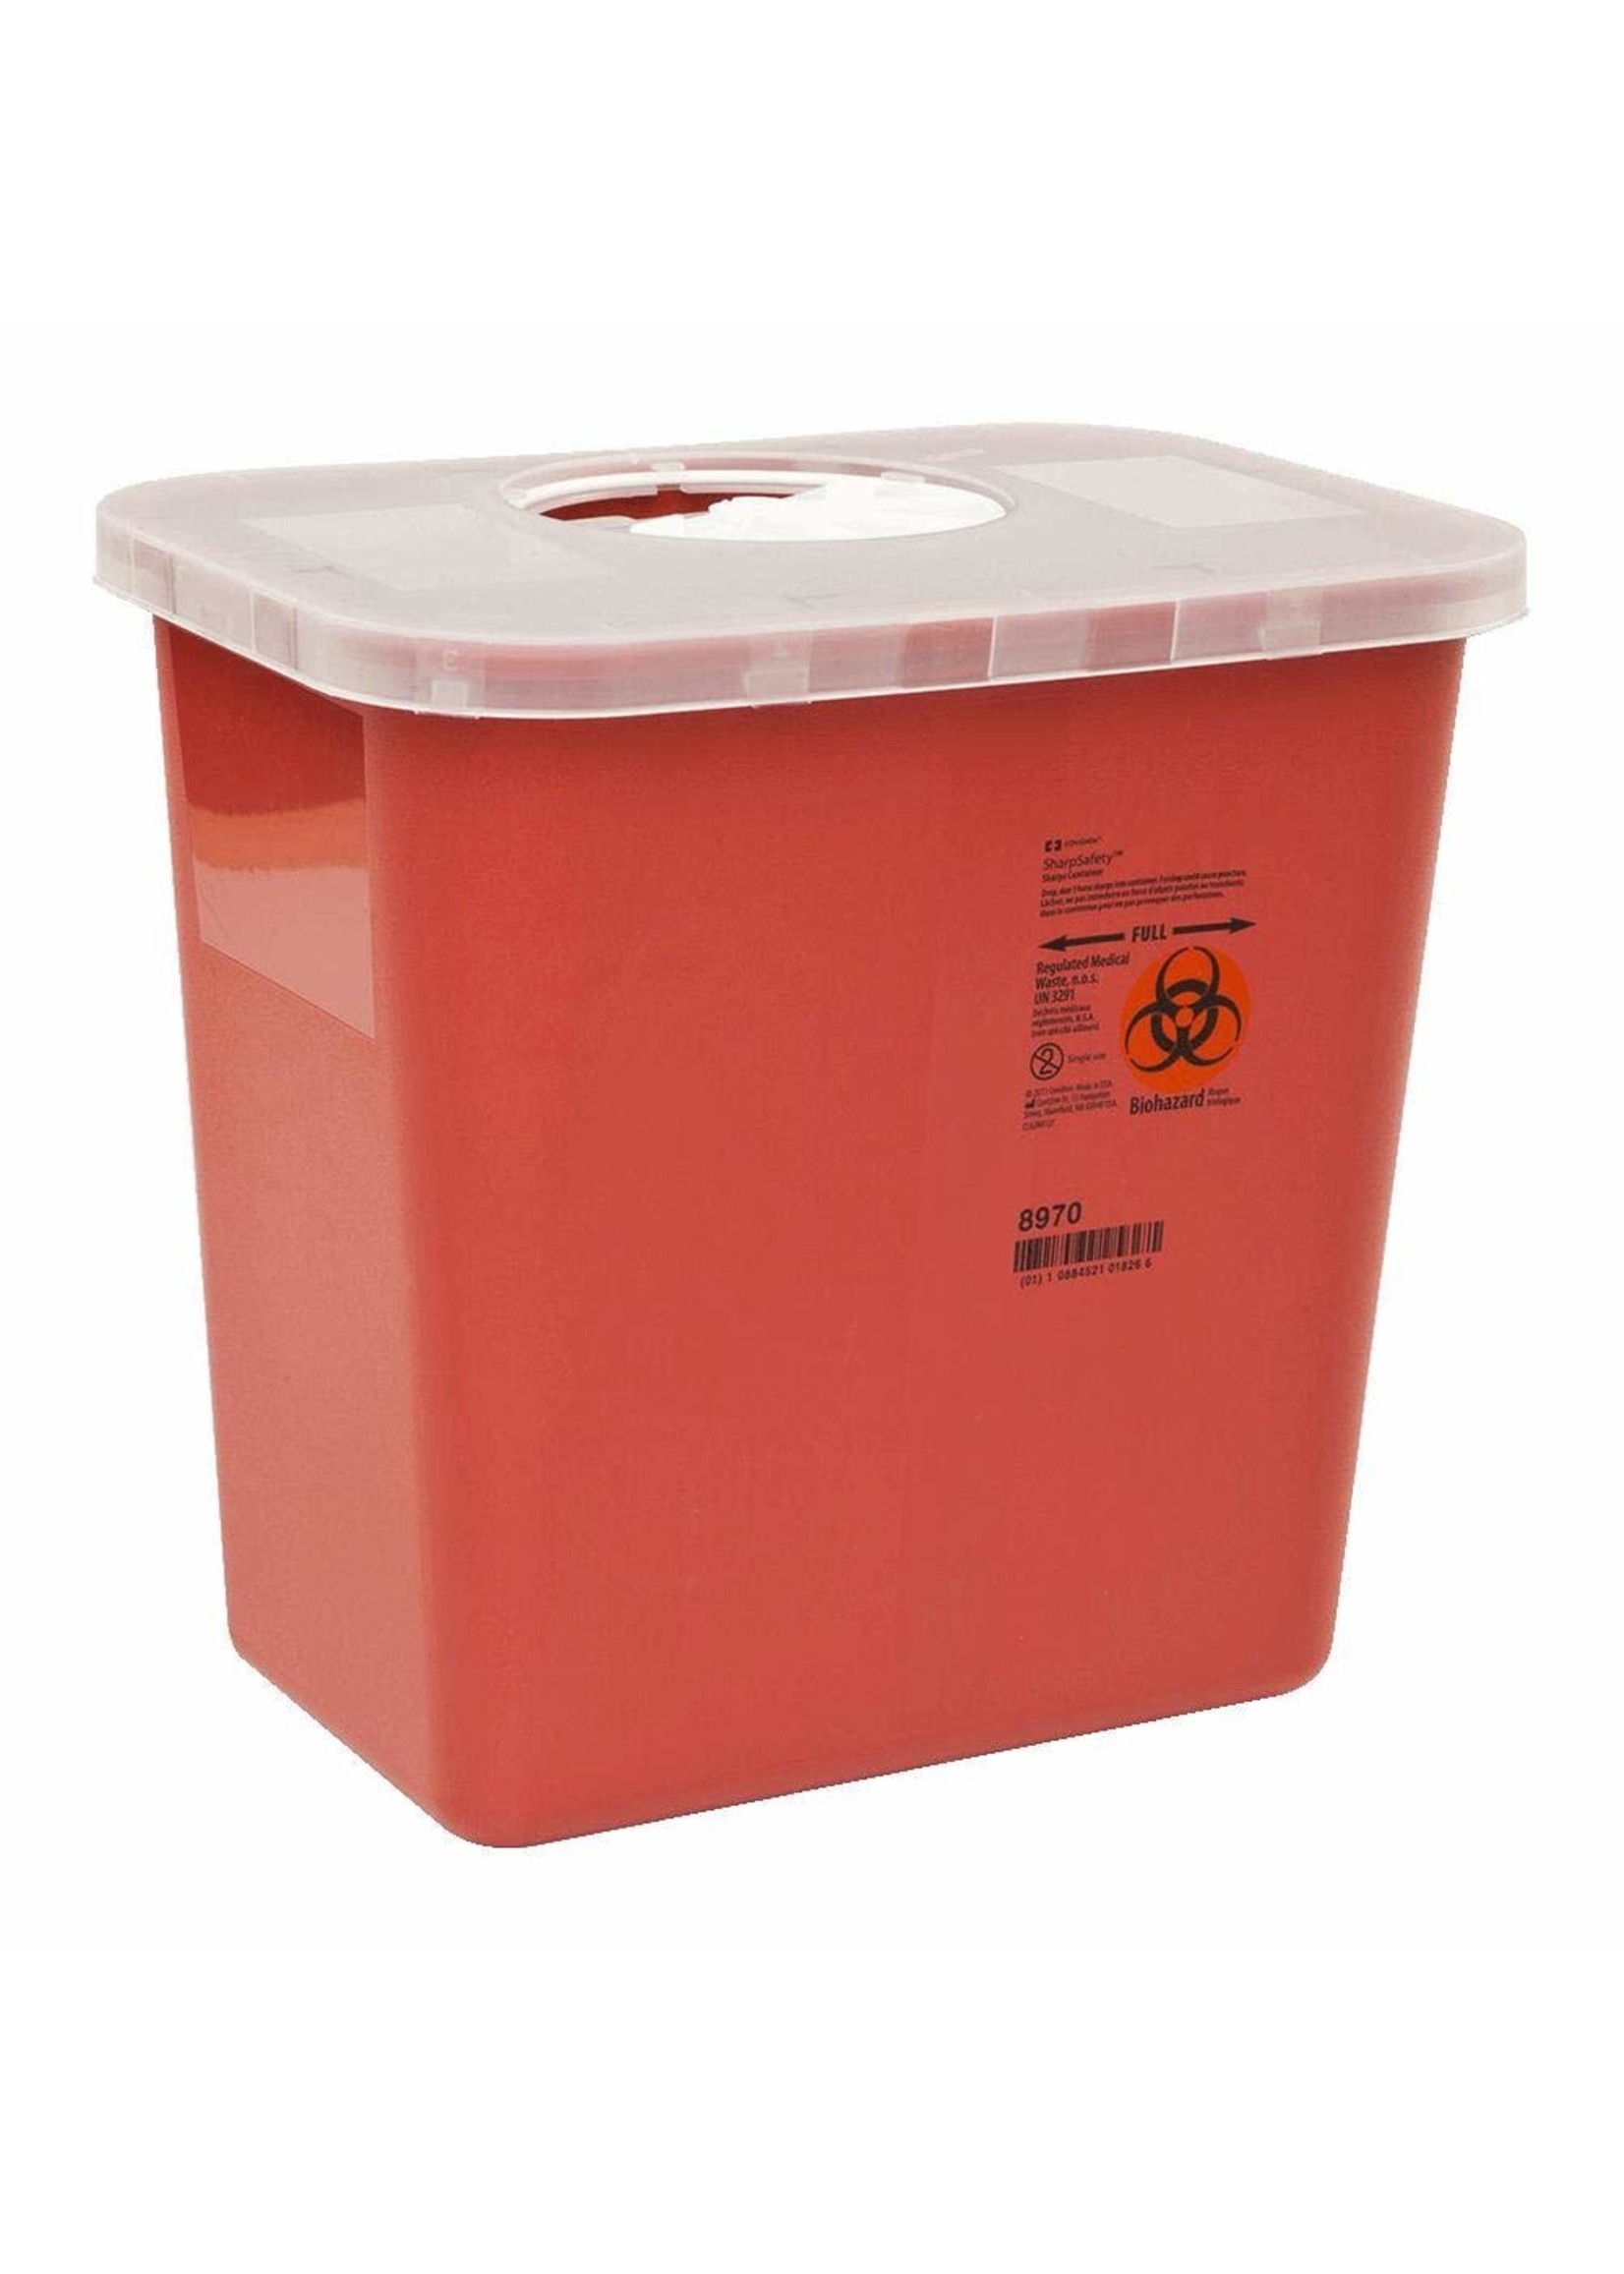 Sharps Container 2 Gal  Roto Lid  (8970)